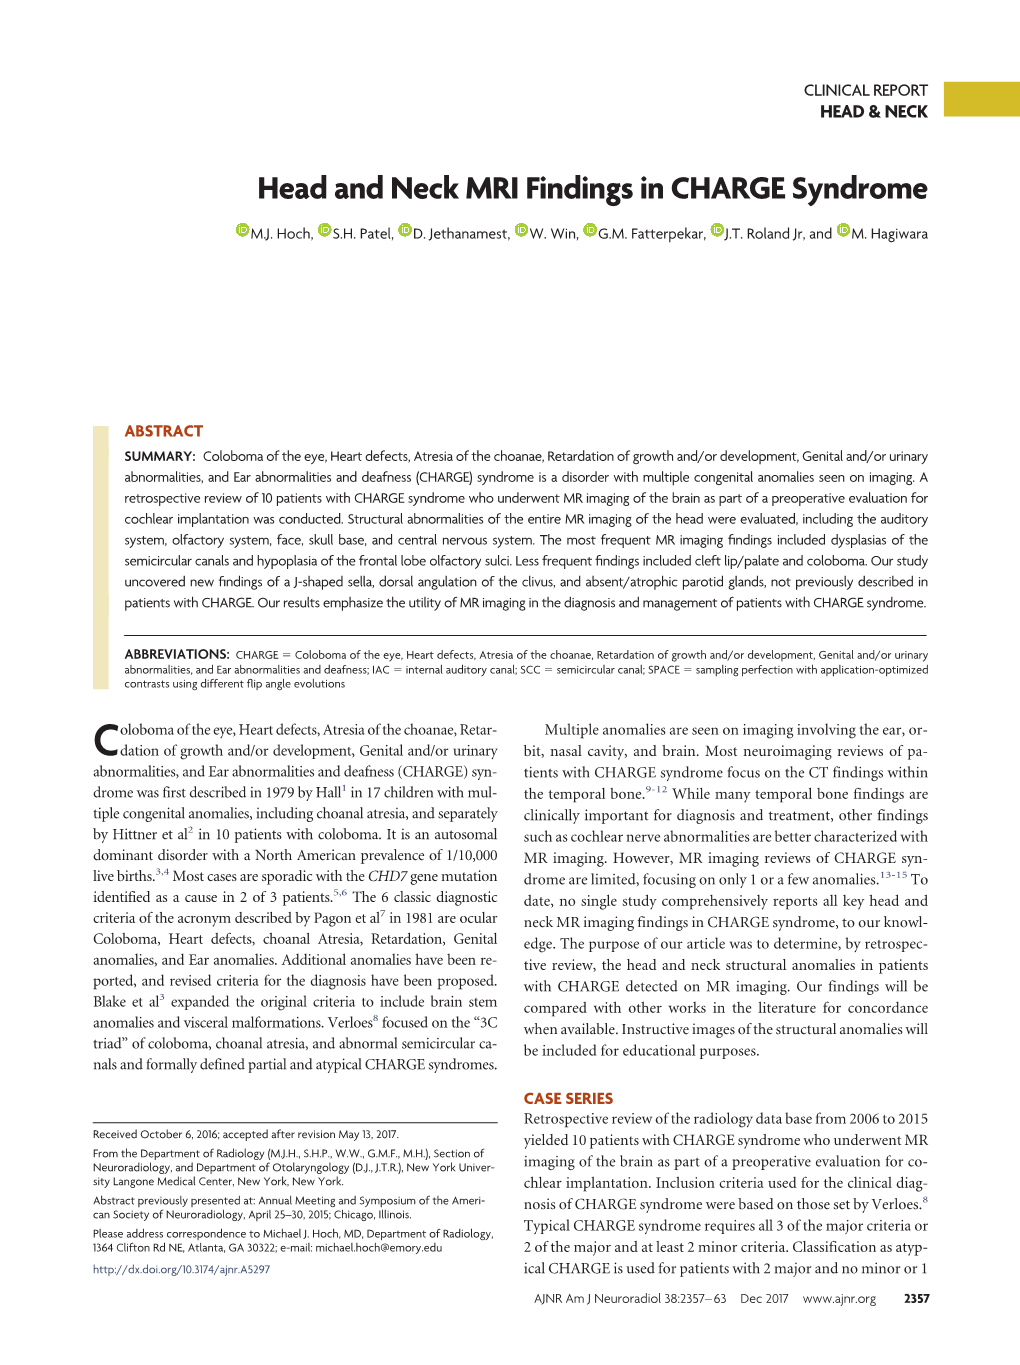 Head and Neck MRI Findings in CHARGE Syndrome